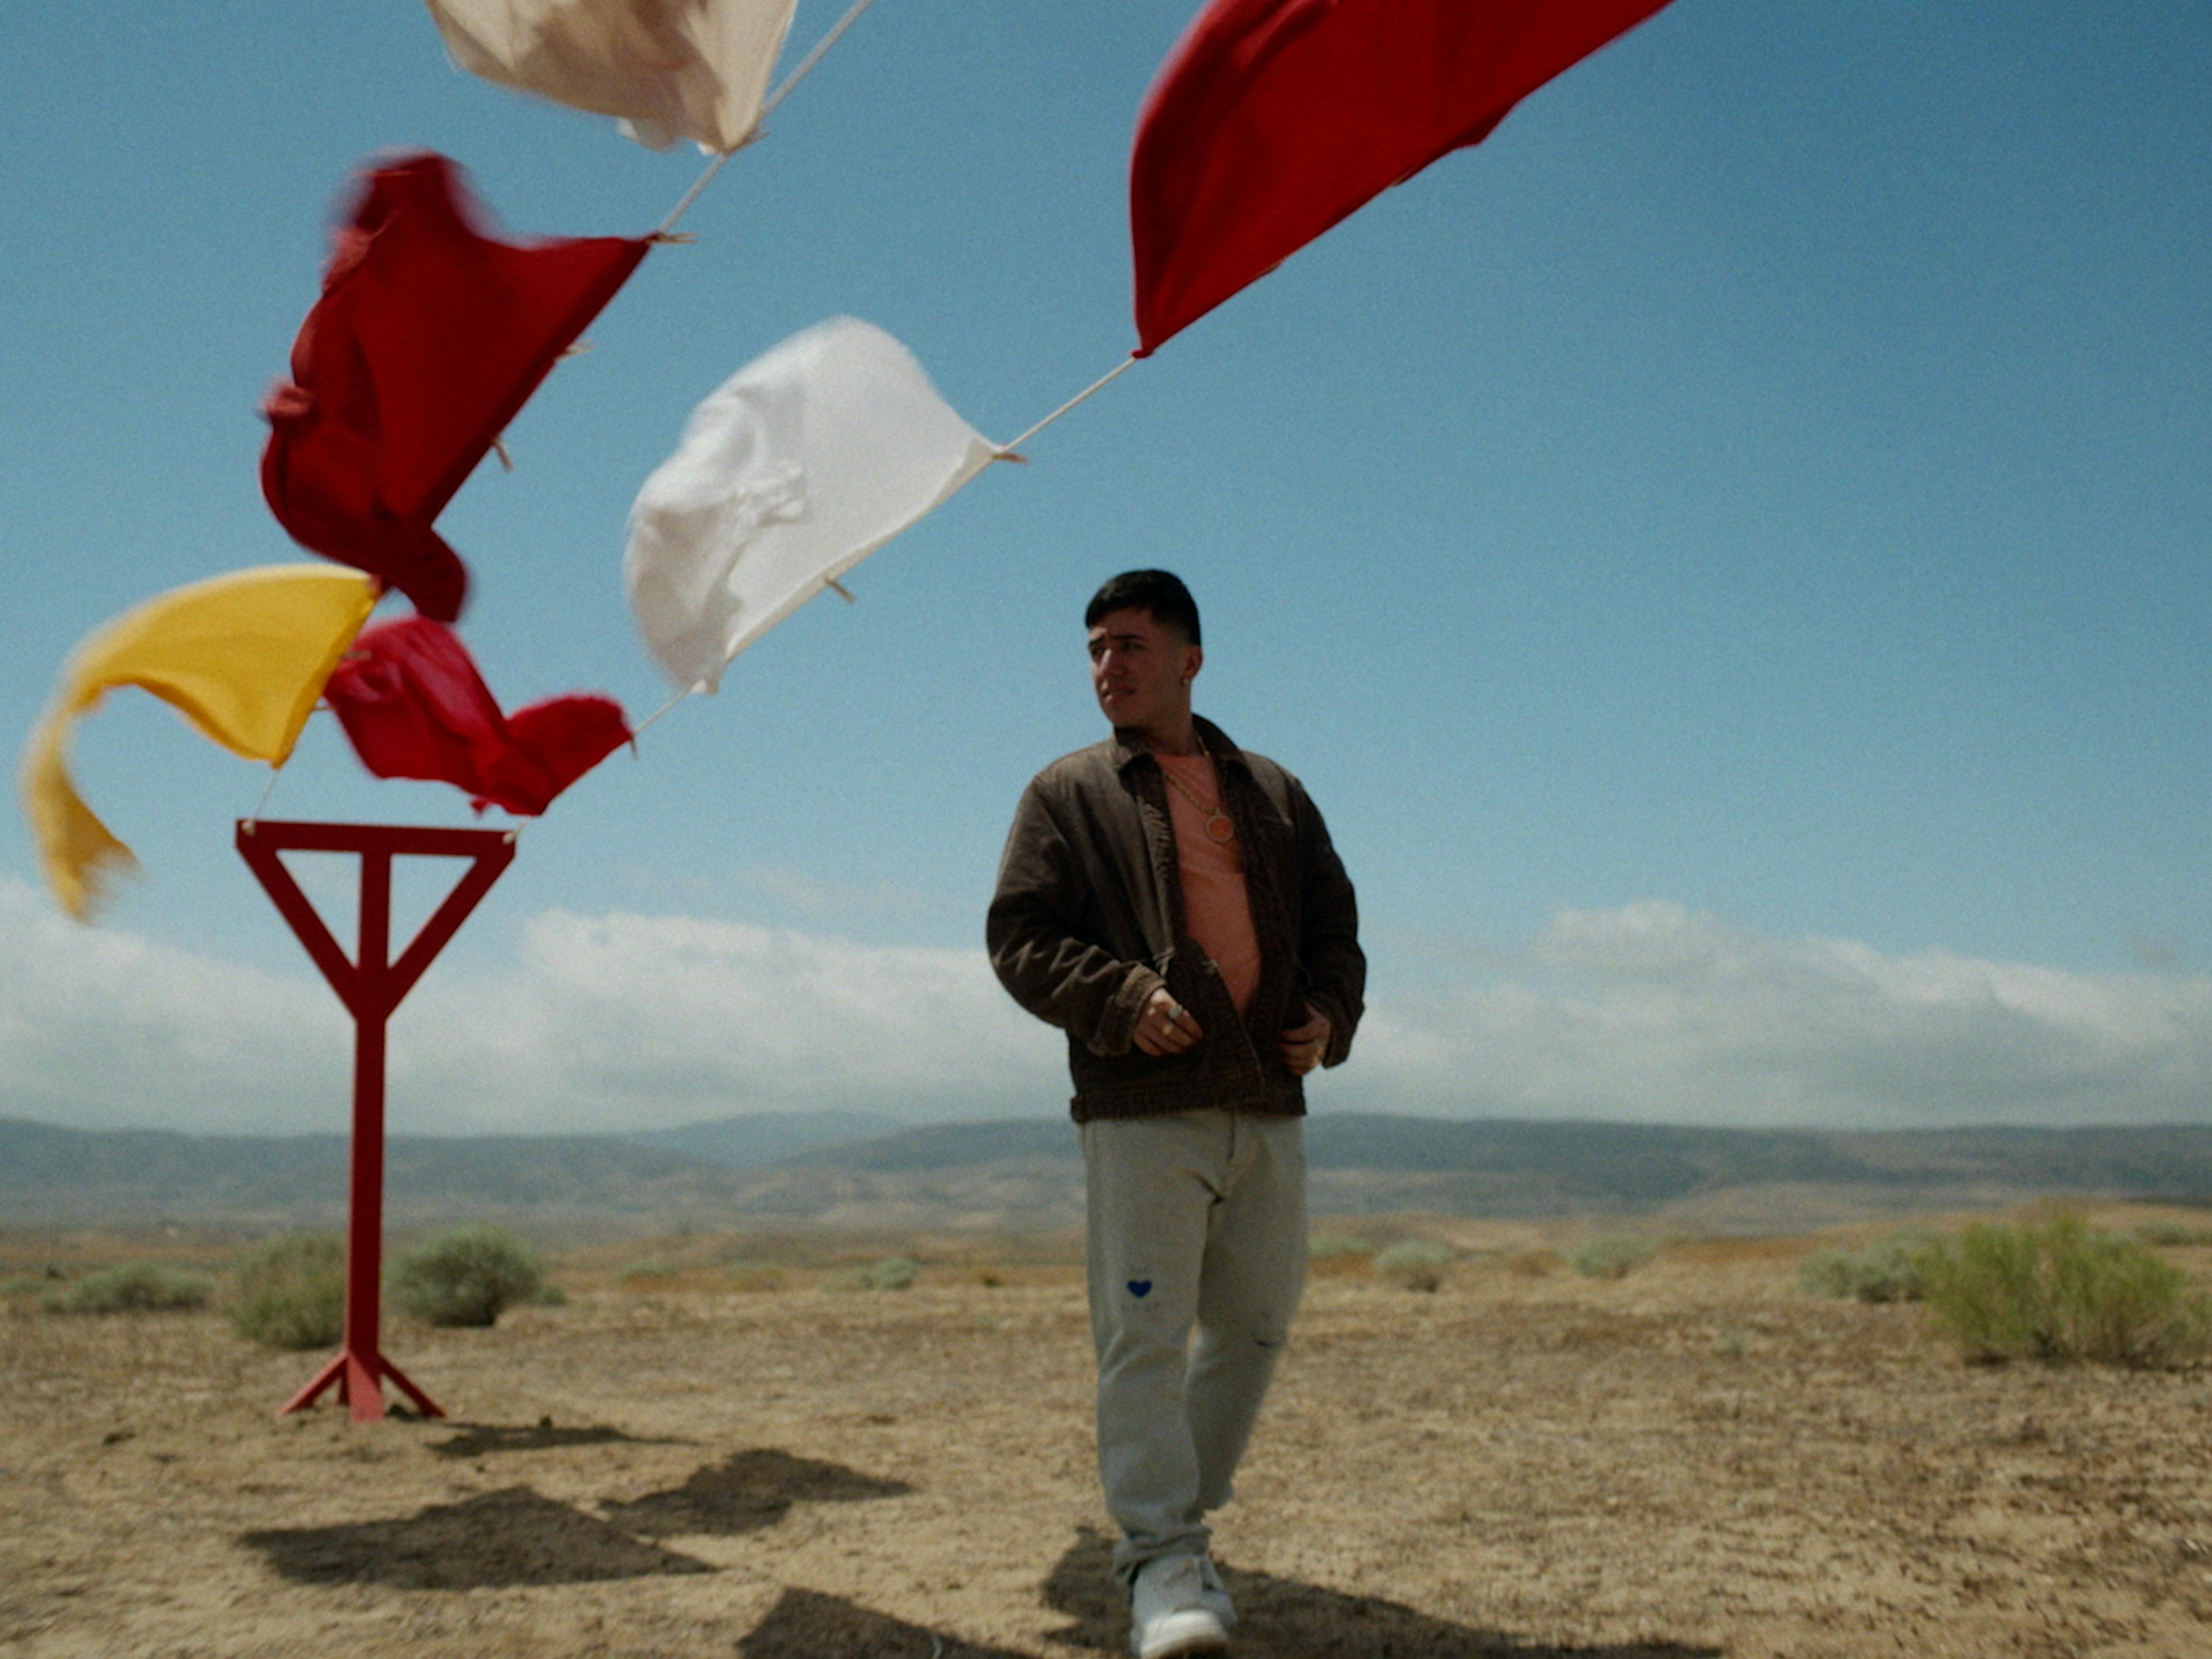 A man stands under a clotheslines in the desert with colorful cloths flowing in the wind